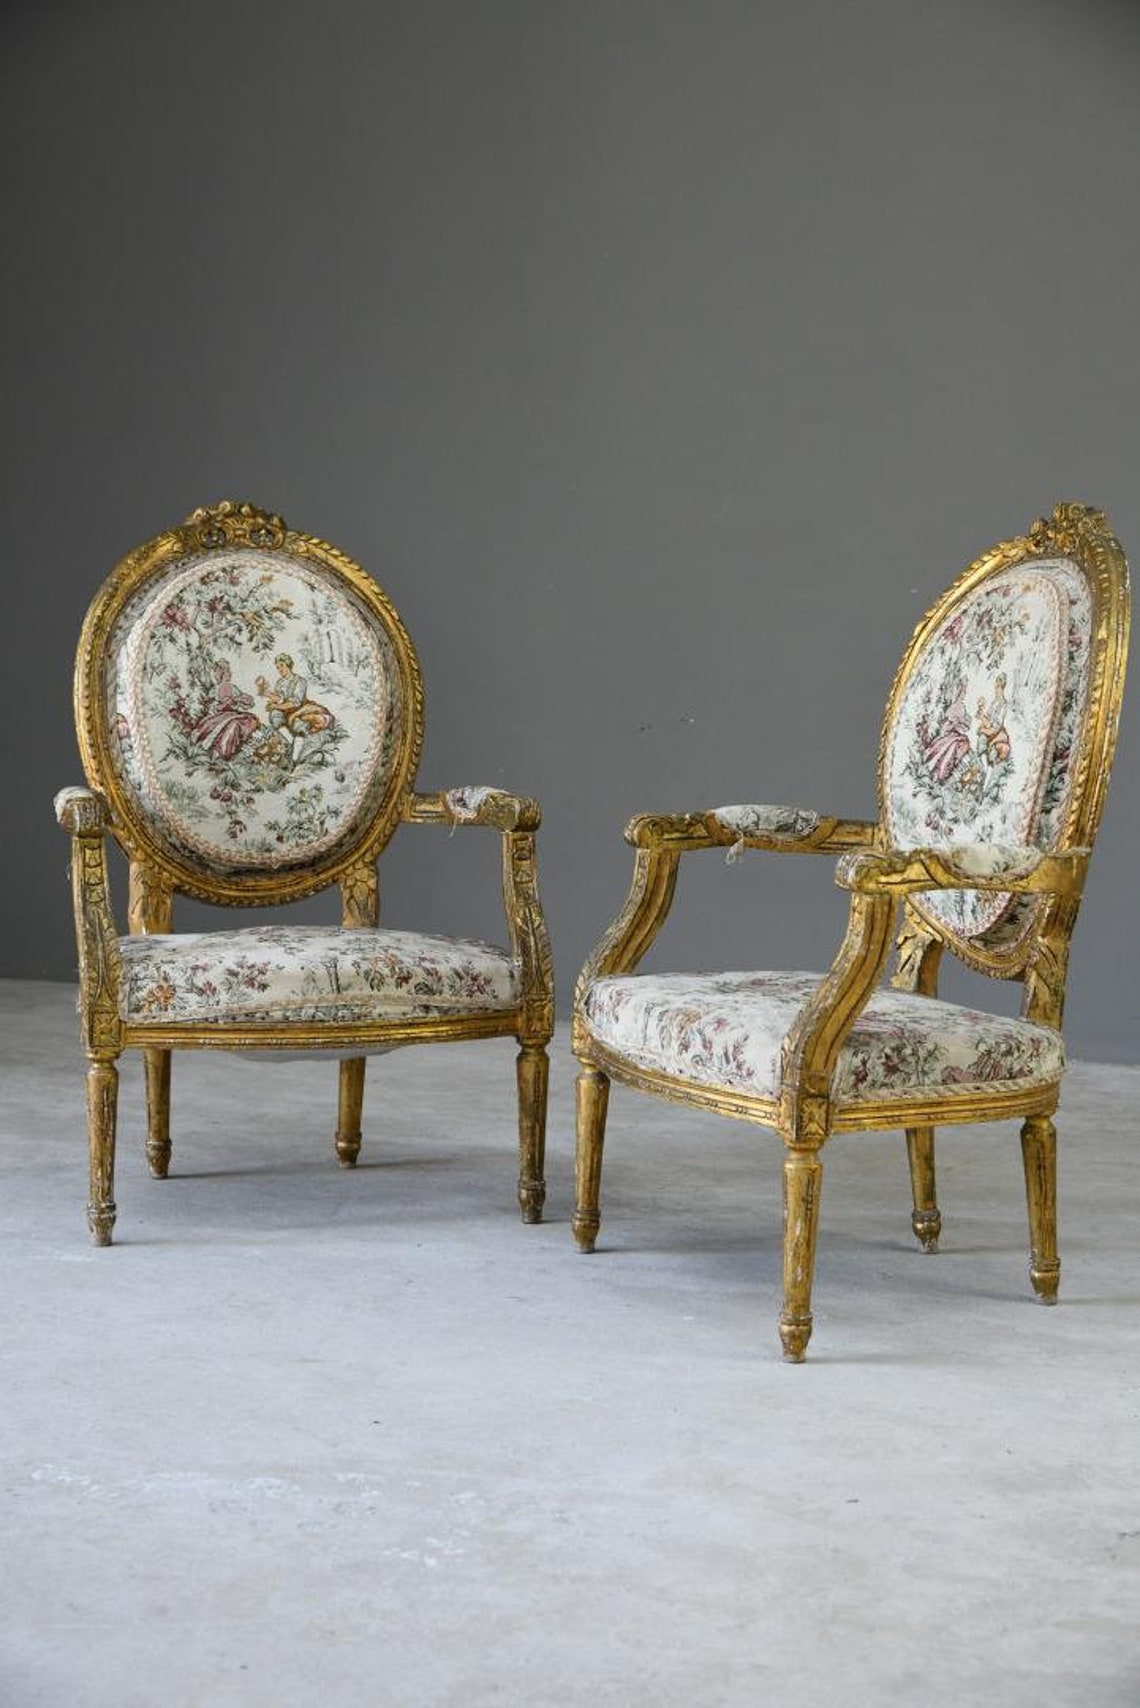 From Gilt To Gesso: The Finishing Touches Of French Furniture Design